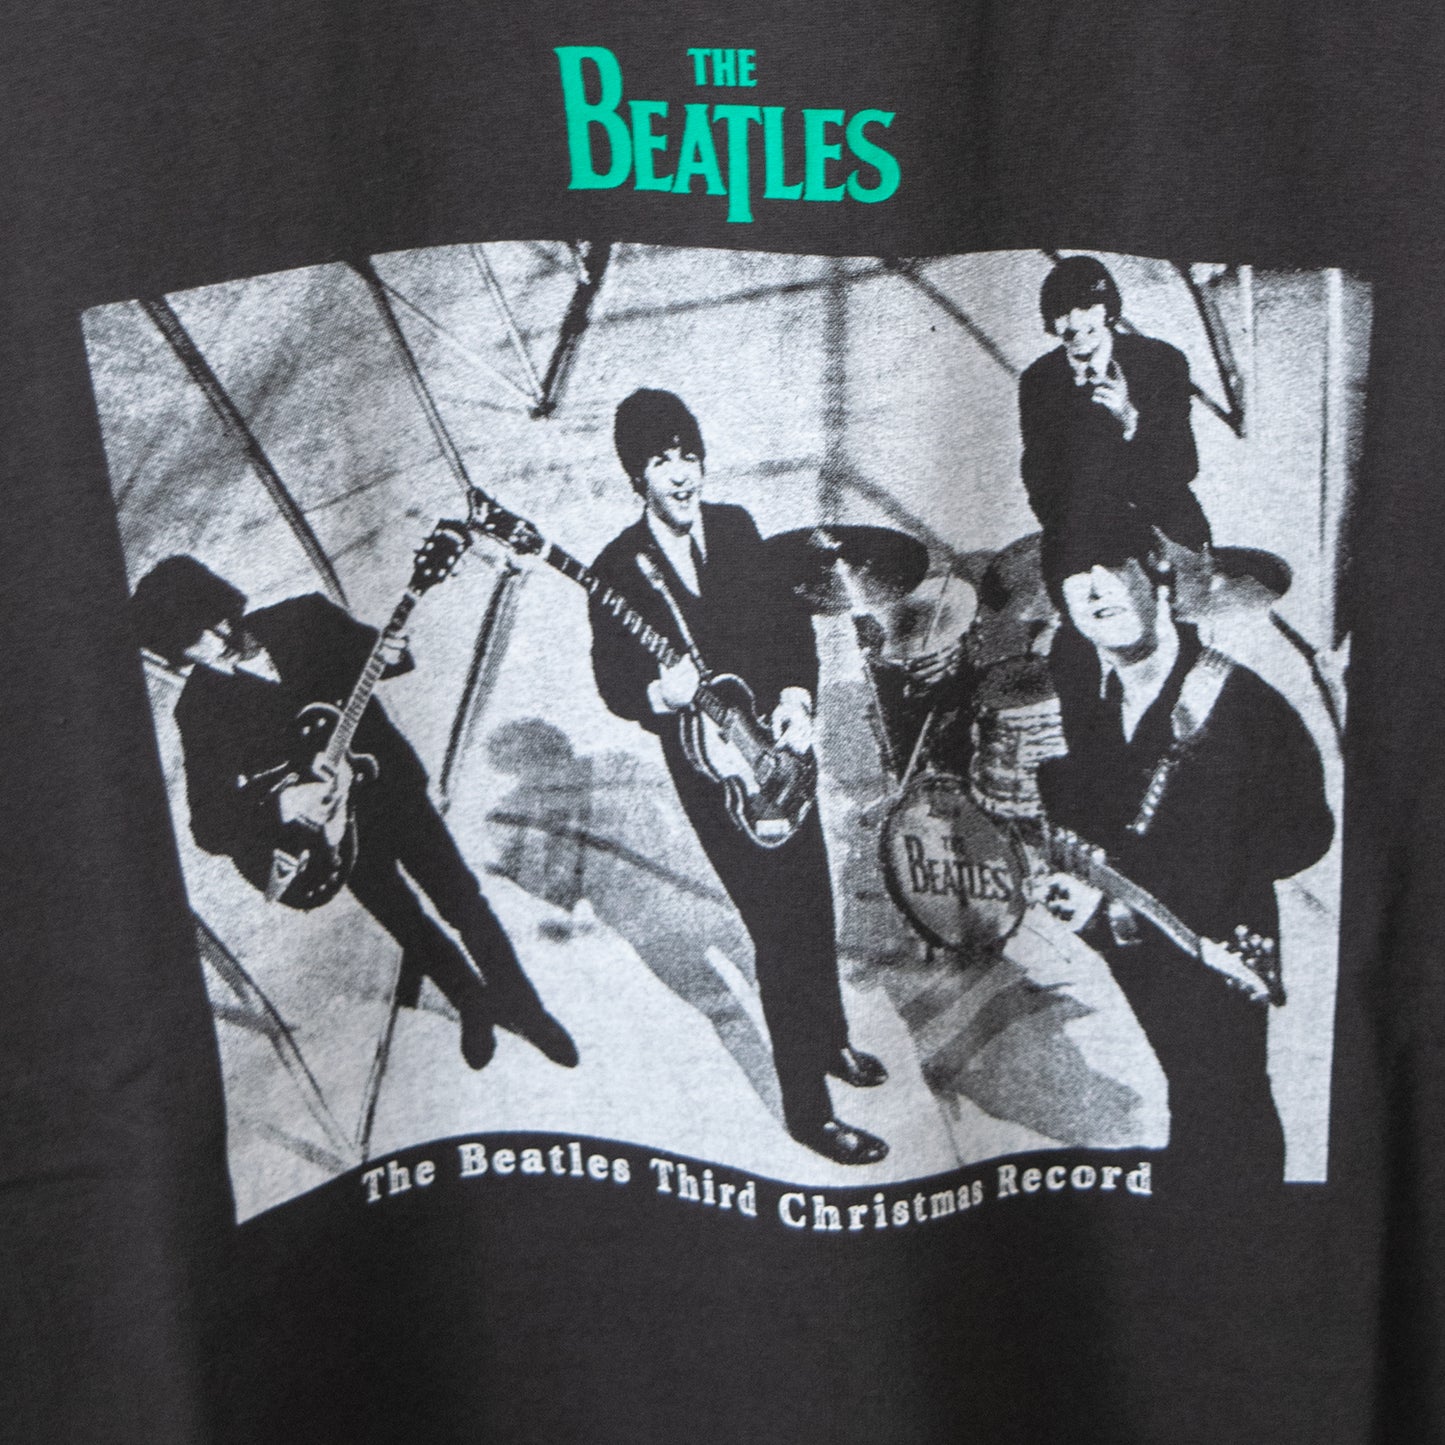 THE BEATLES Photo Print S/S T-shirt - YOUAREMYPOISON